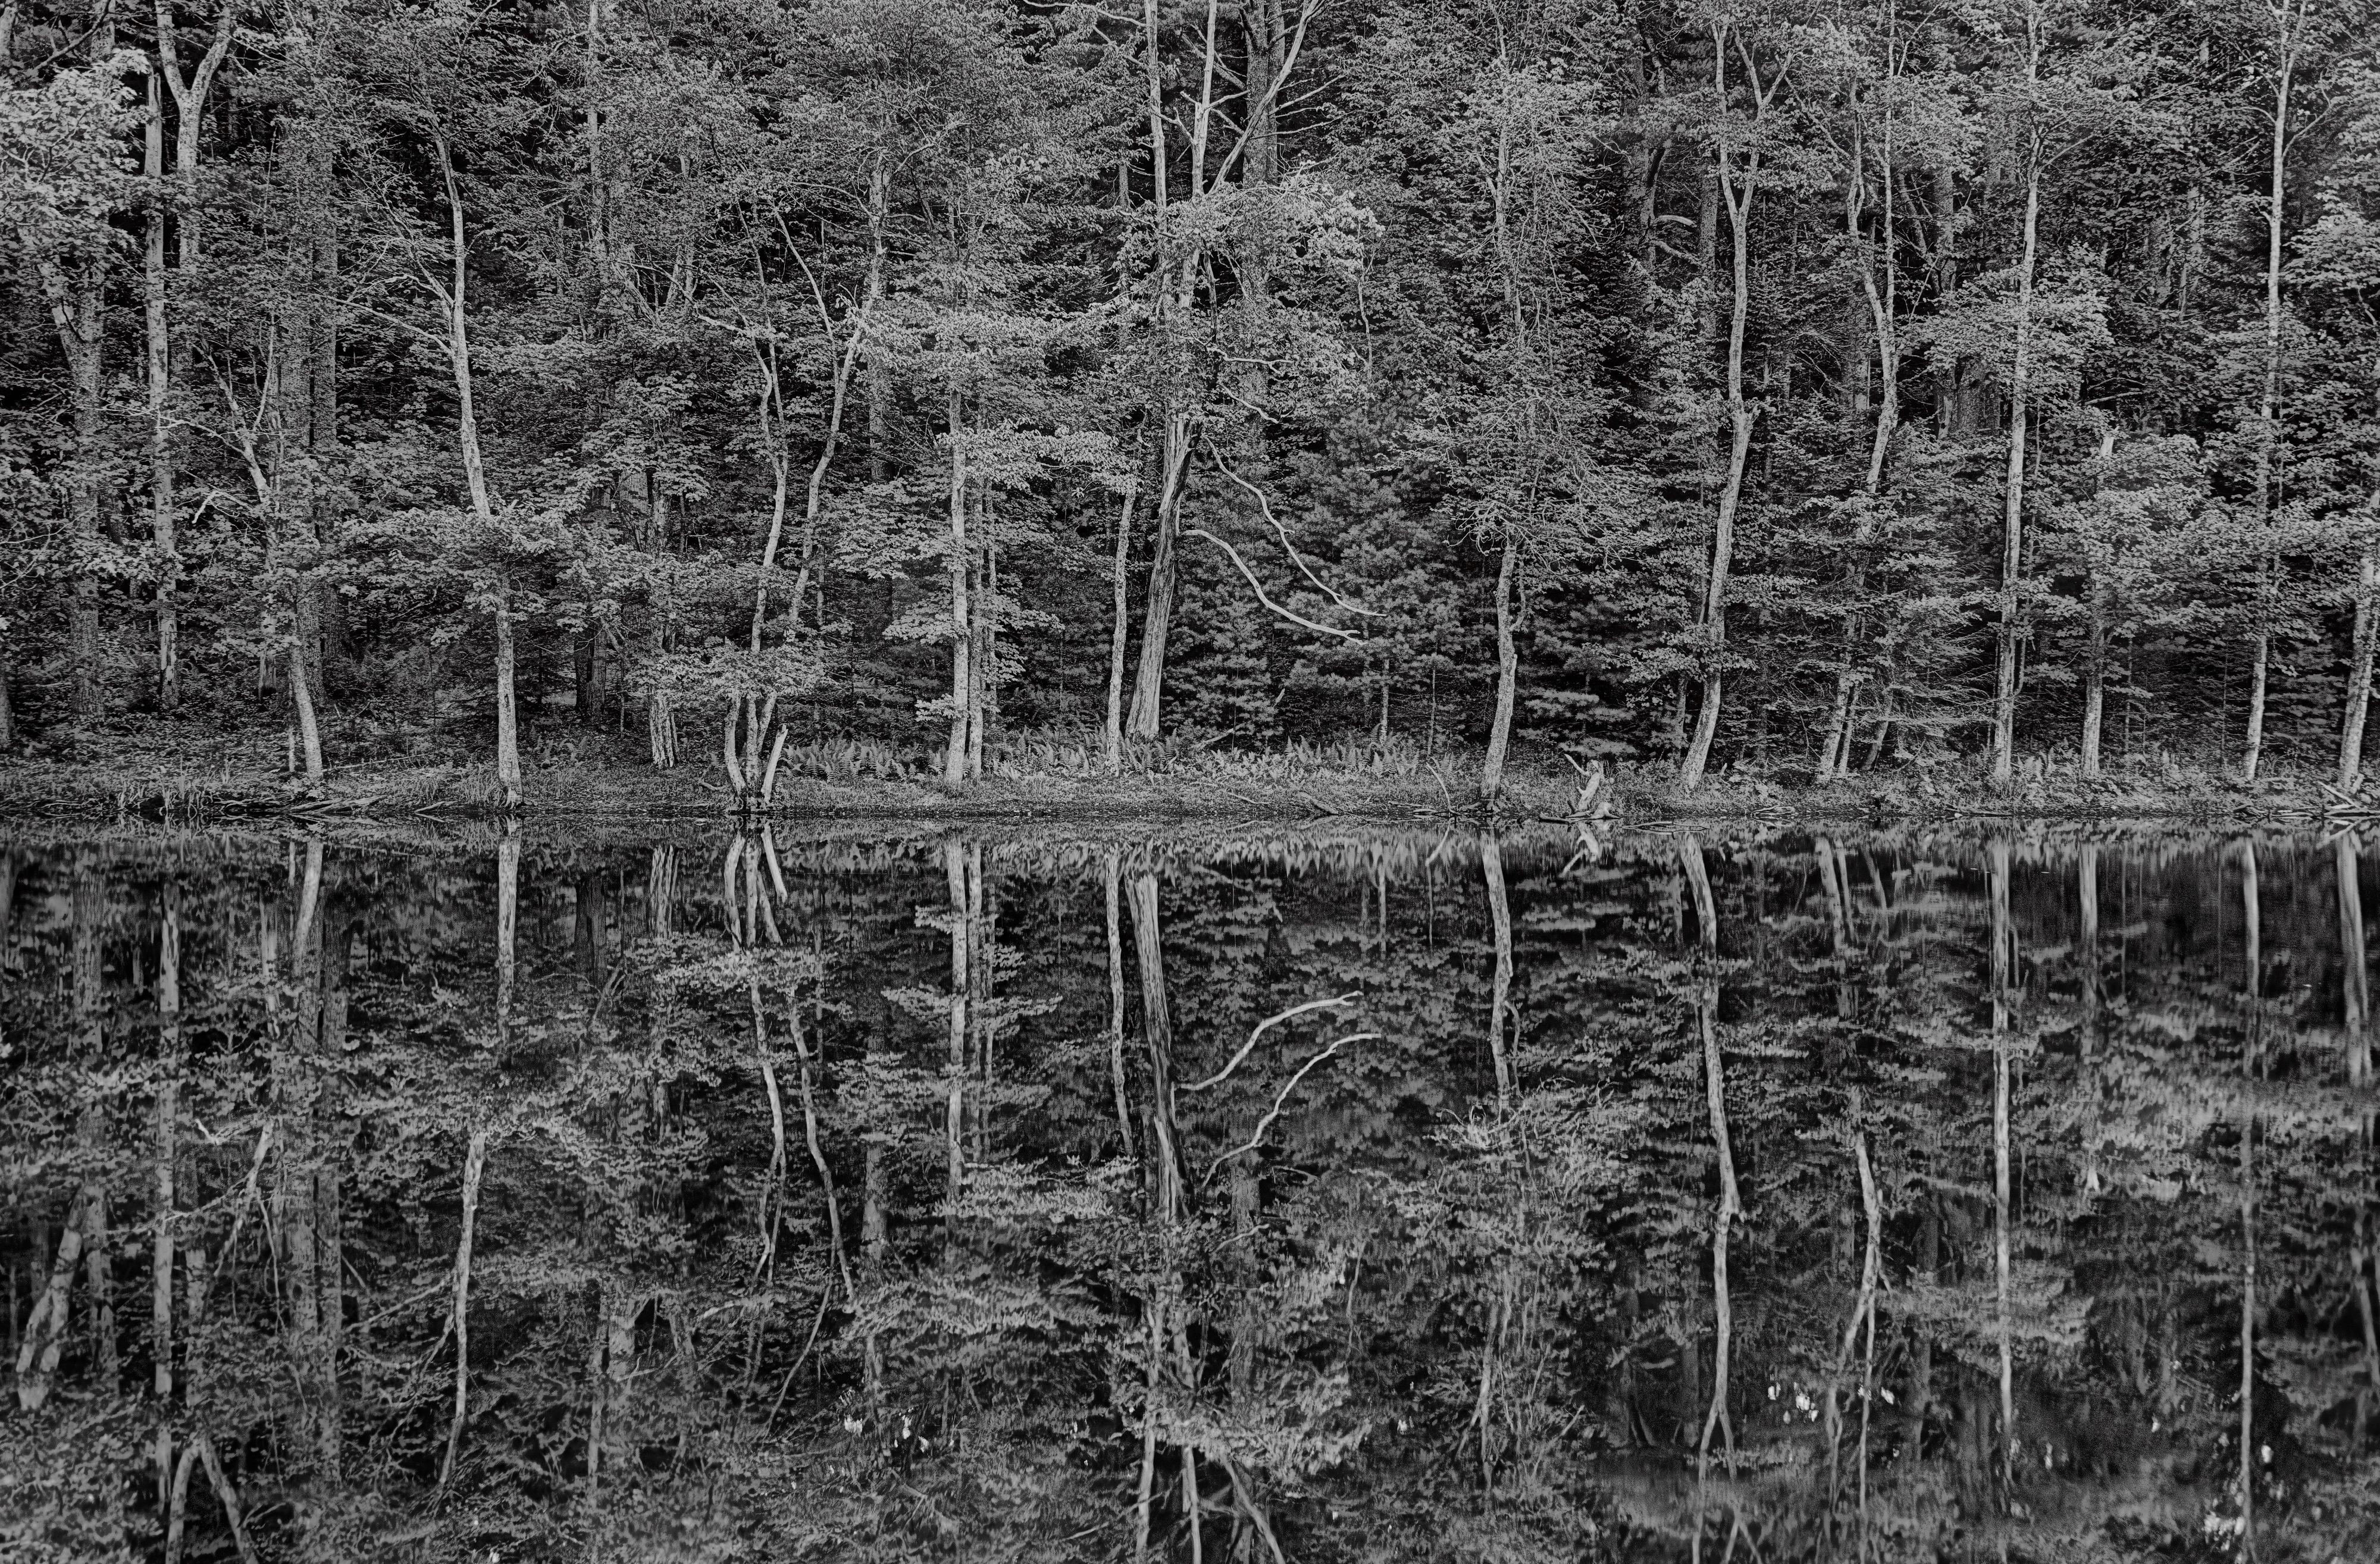 Reflections in the Maine Woods